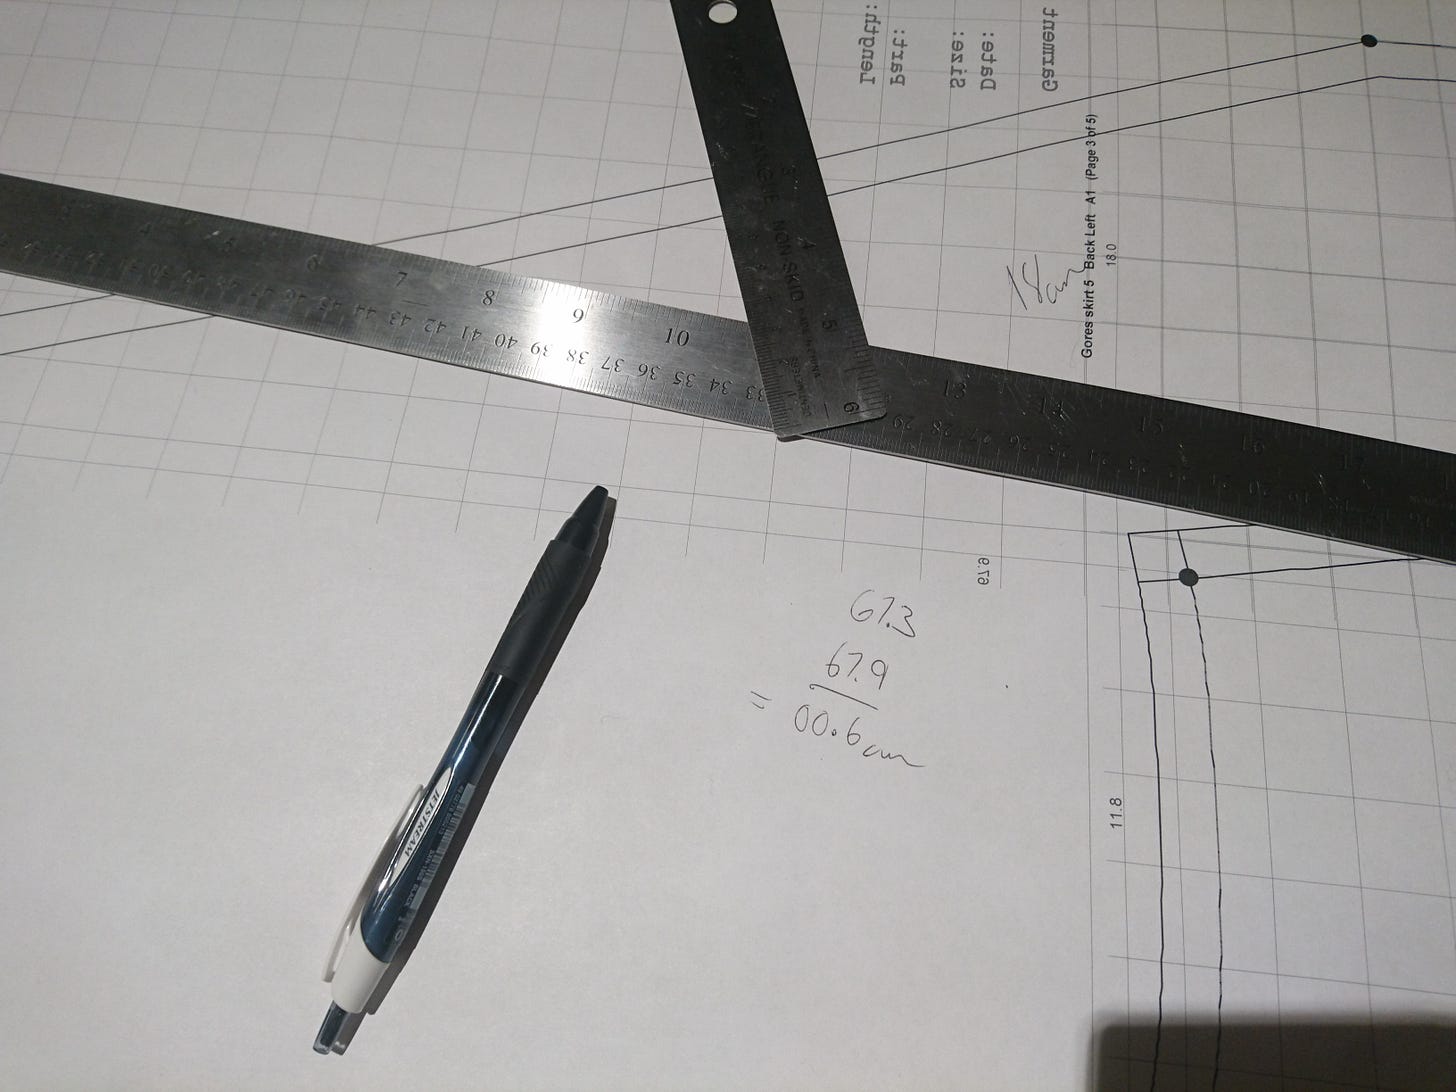 pattern paper with rulers and a pen on top, and some quick math drawn on the paper